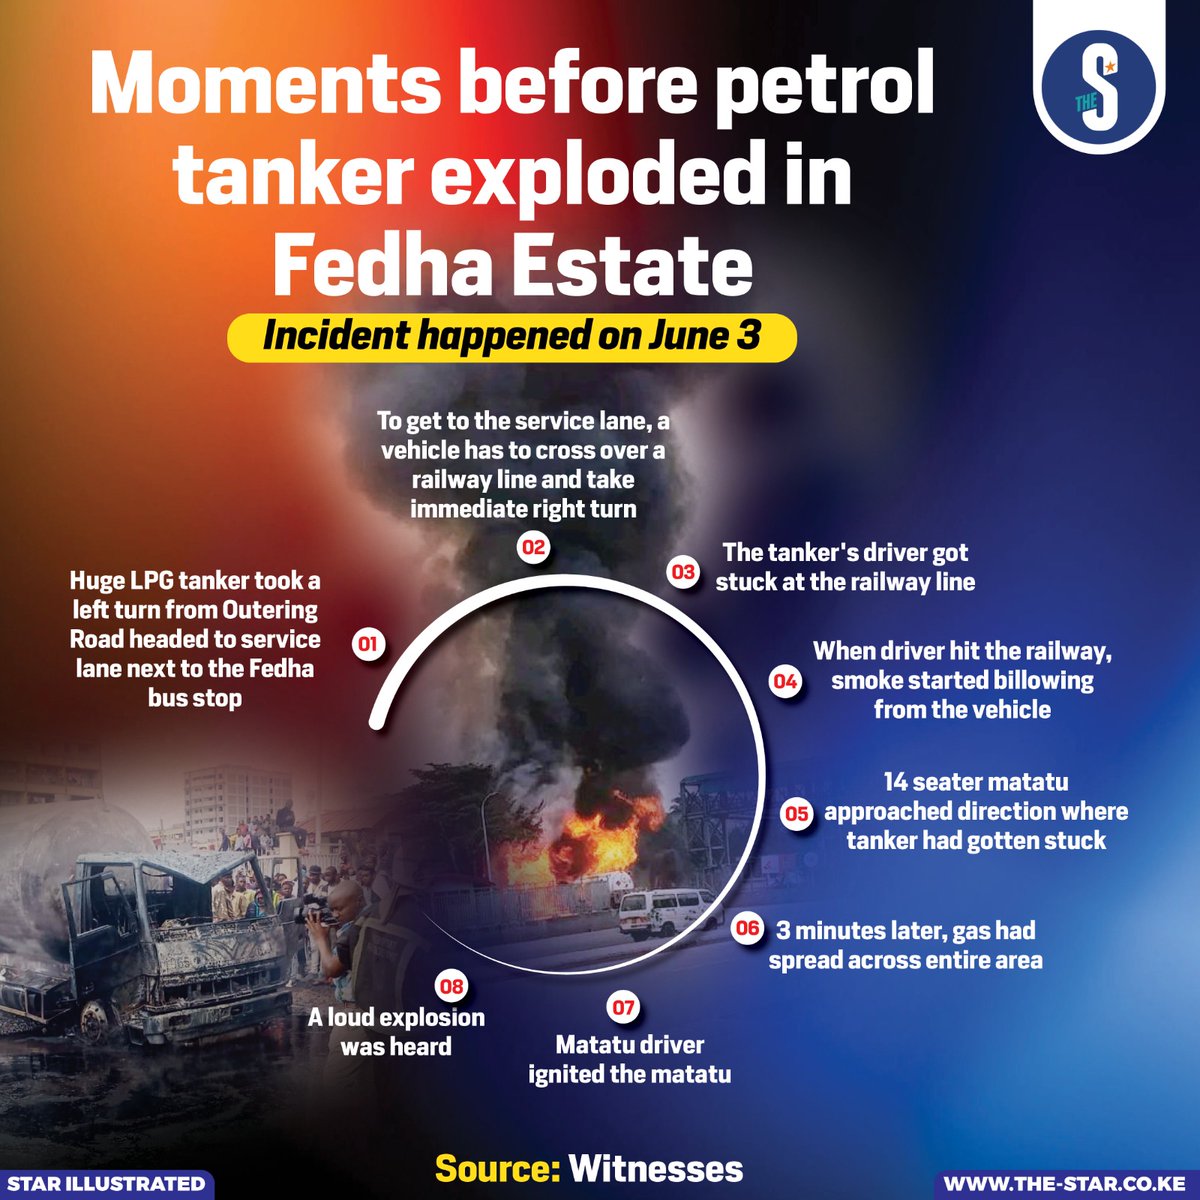 A lorry ferrying a tank of Liquefied Petroleum Gas burst into flames on June 3. The incident happened near Fedha Estate in Nairobi County. The gas tanker exploded near a bus terminal. Photos and video clips from the incident showed a huge smoke engulfing the area at around